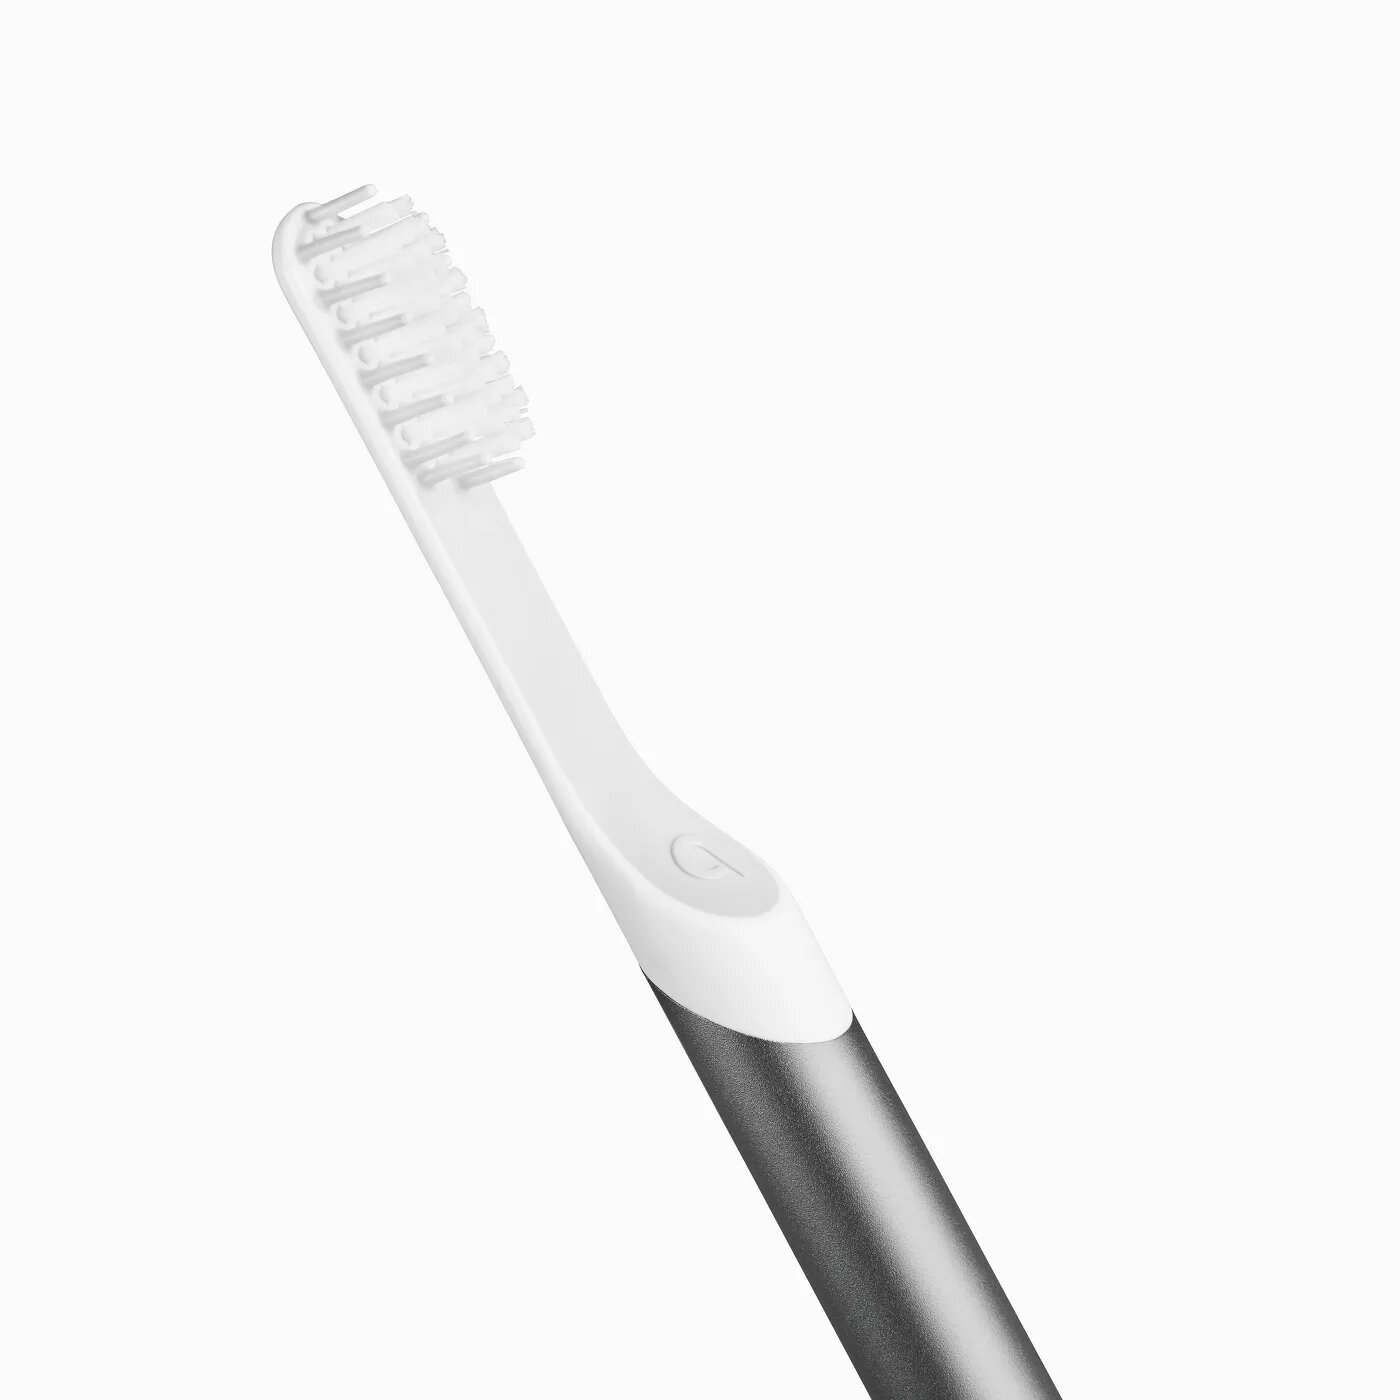 quip Electric Toothbrush, Built-In Timer + Travel Case, Slate Metal - image 4 of 6